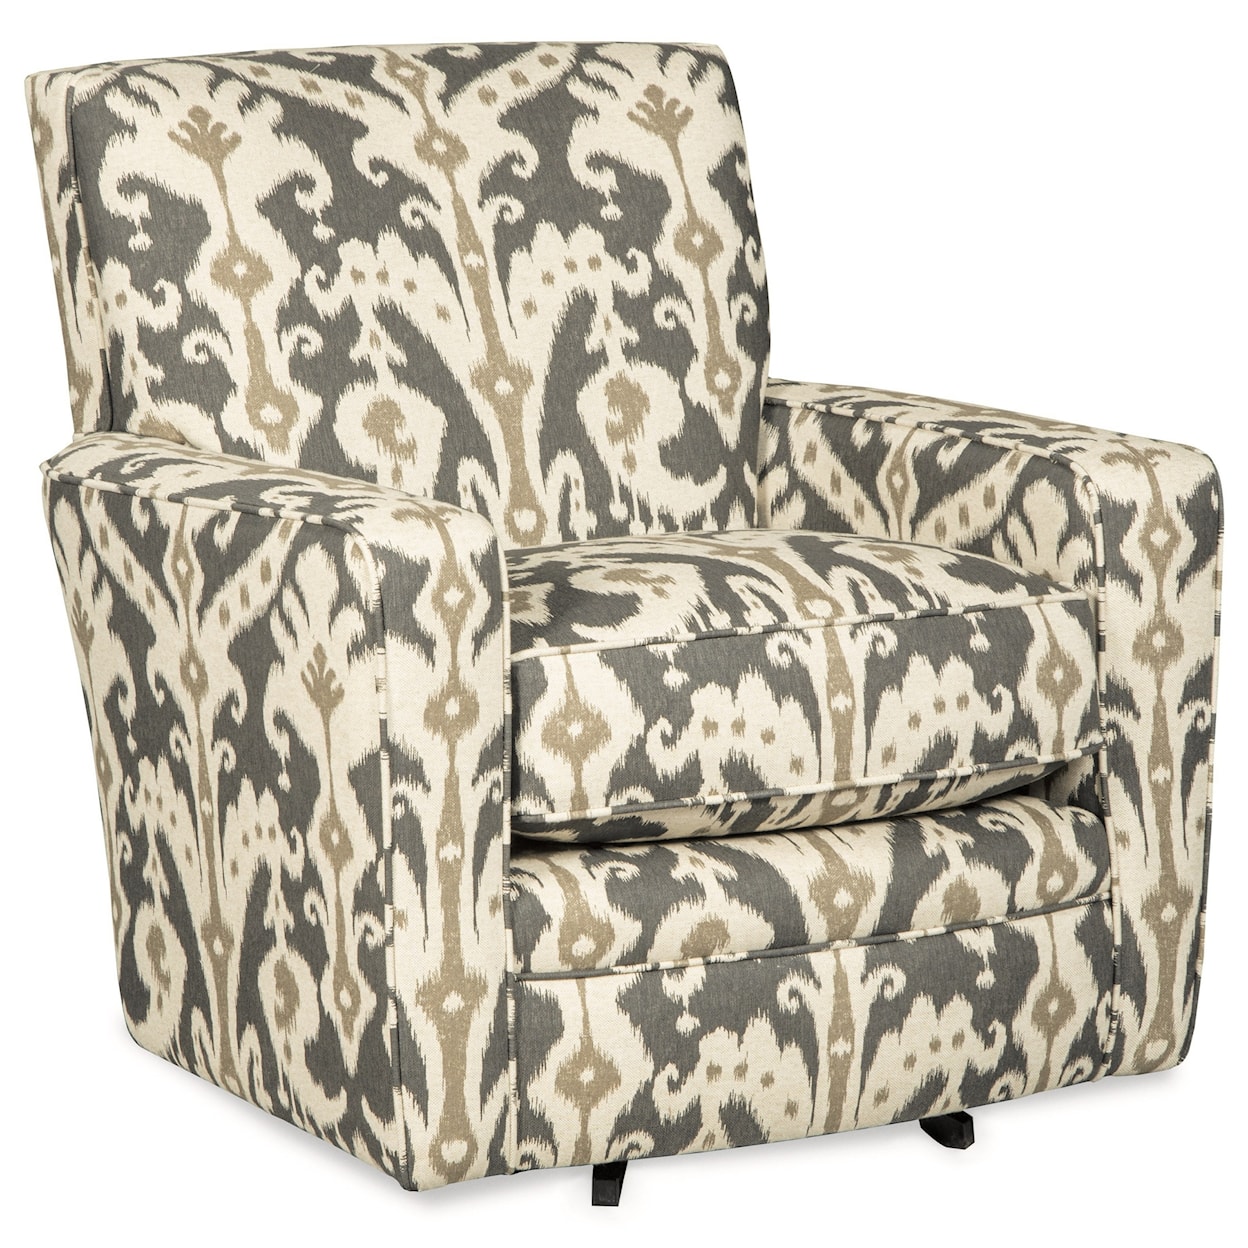 Hickory Craft Swivel Chairs Upholstered Swivel Chair